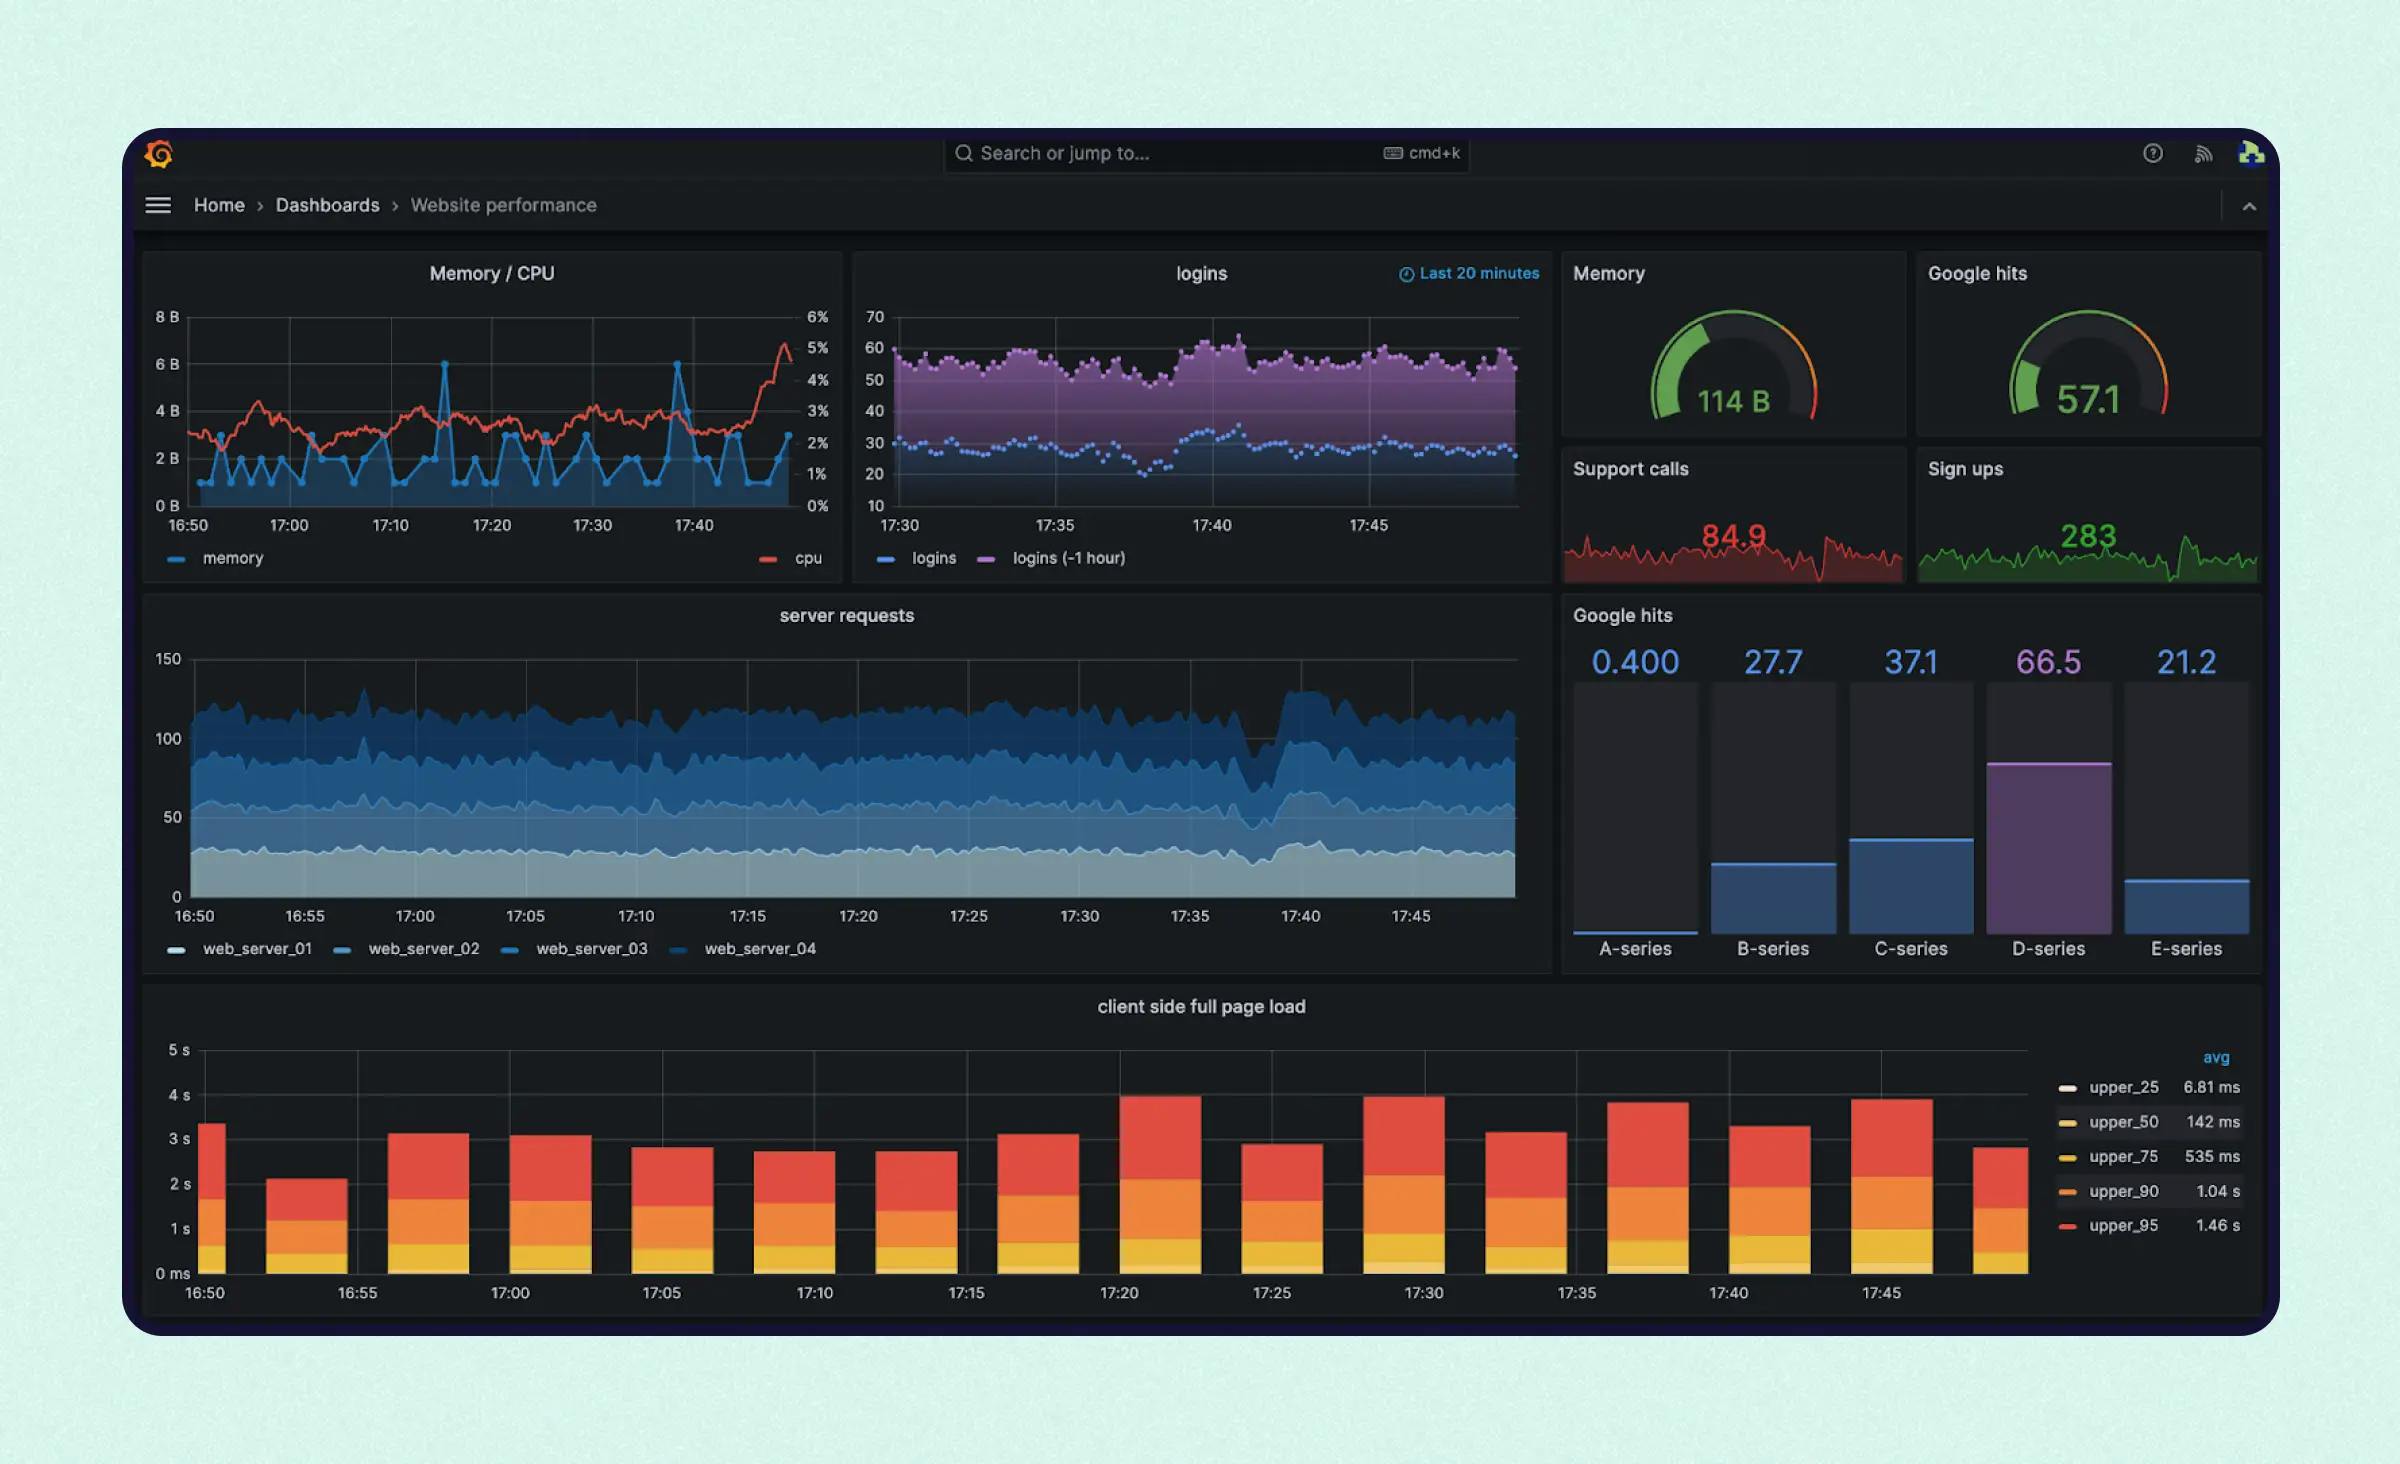 The Grafana interface displays various charts, ranging from bar charts to pie diagrams, making it a convenient tool for data tracking as part of mobile app maintenance services.